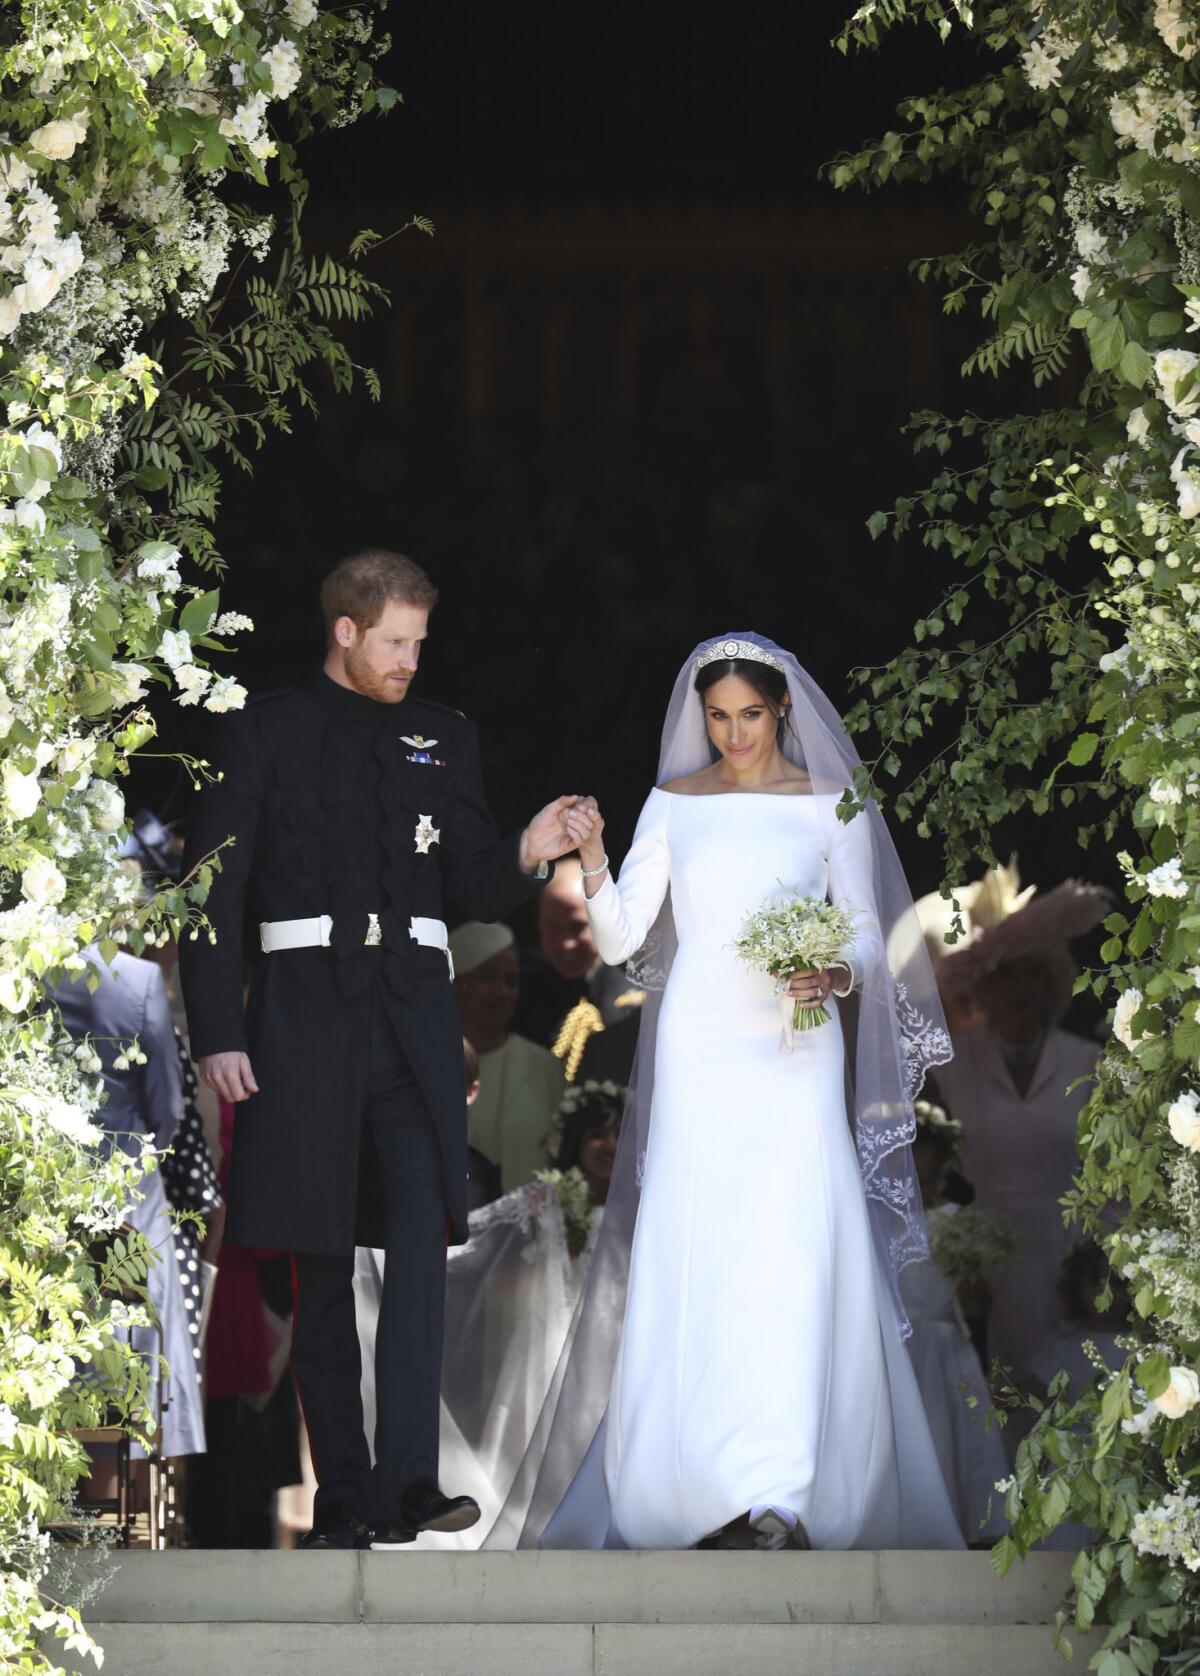 Prince Harry and wife Meghan Markle — the Duke and Duchess of Sussex — exit the steps of St. George's Chapel at Windsor Castle following their wedding Saturday.